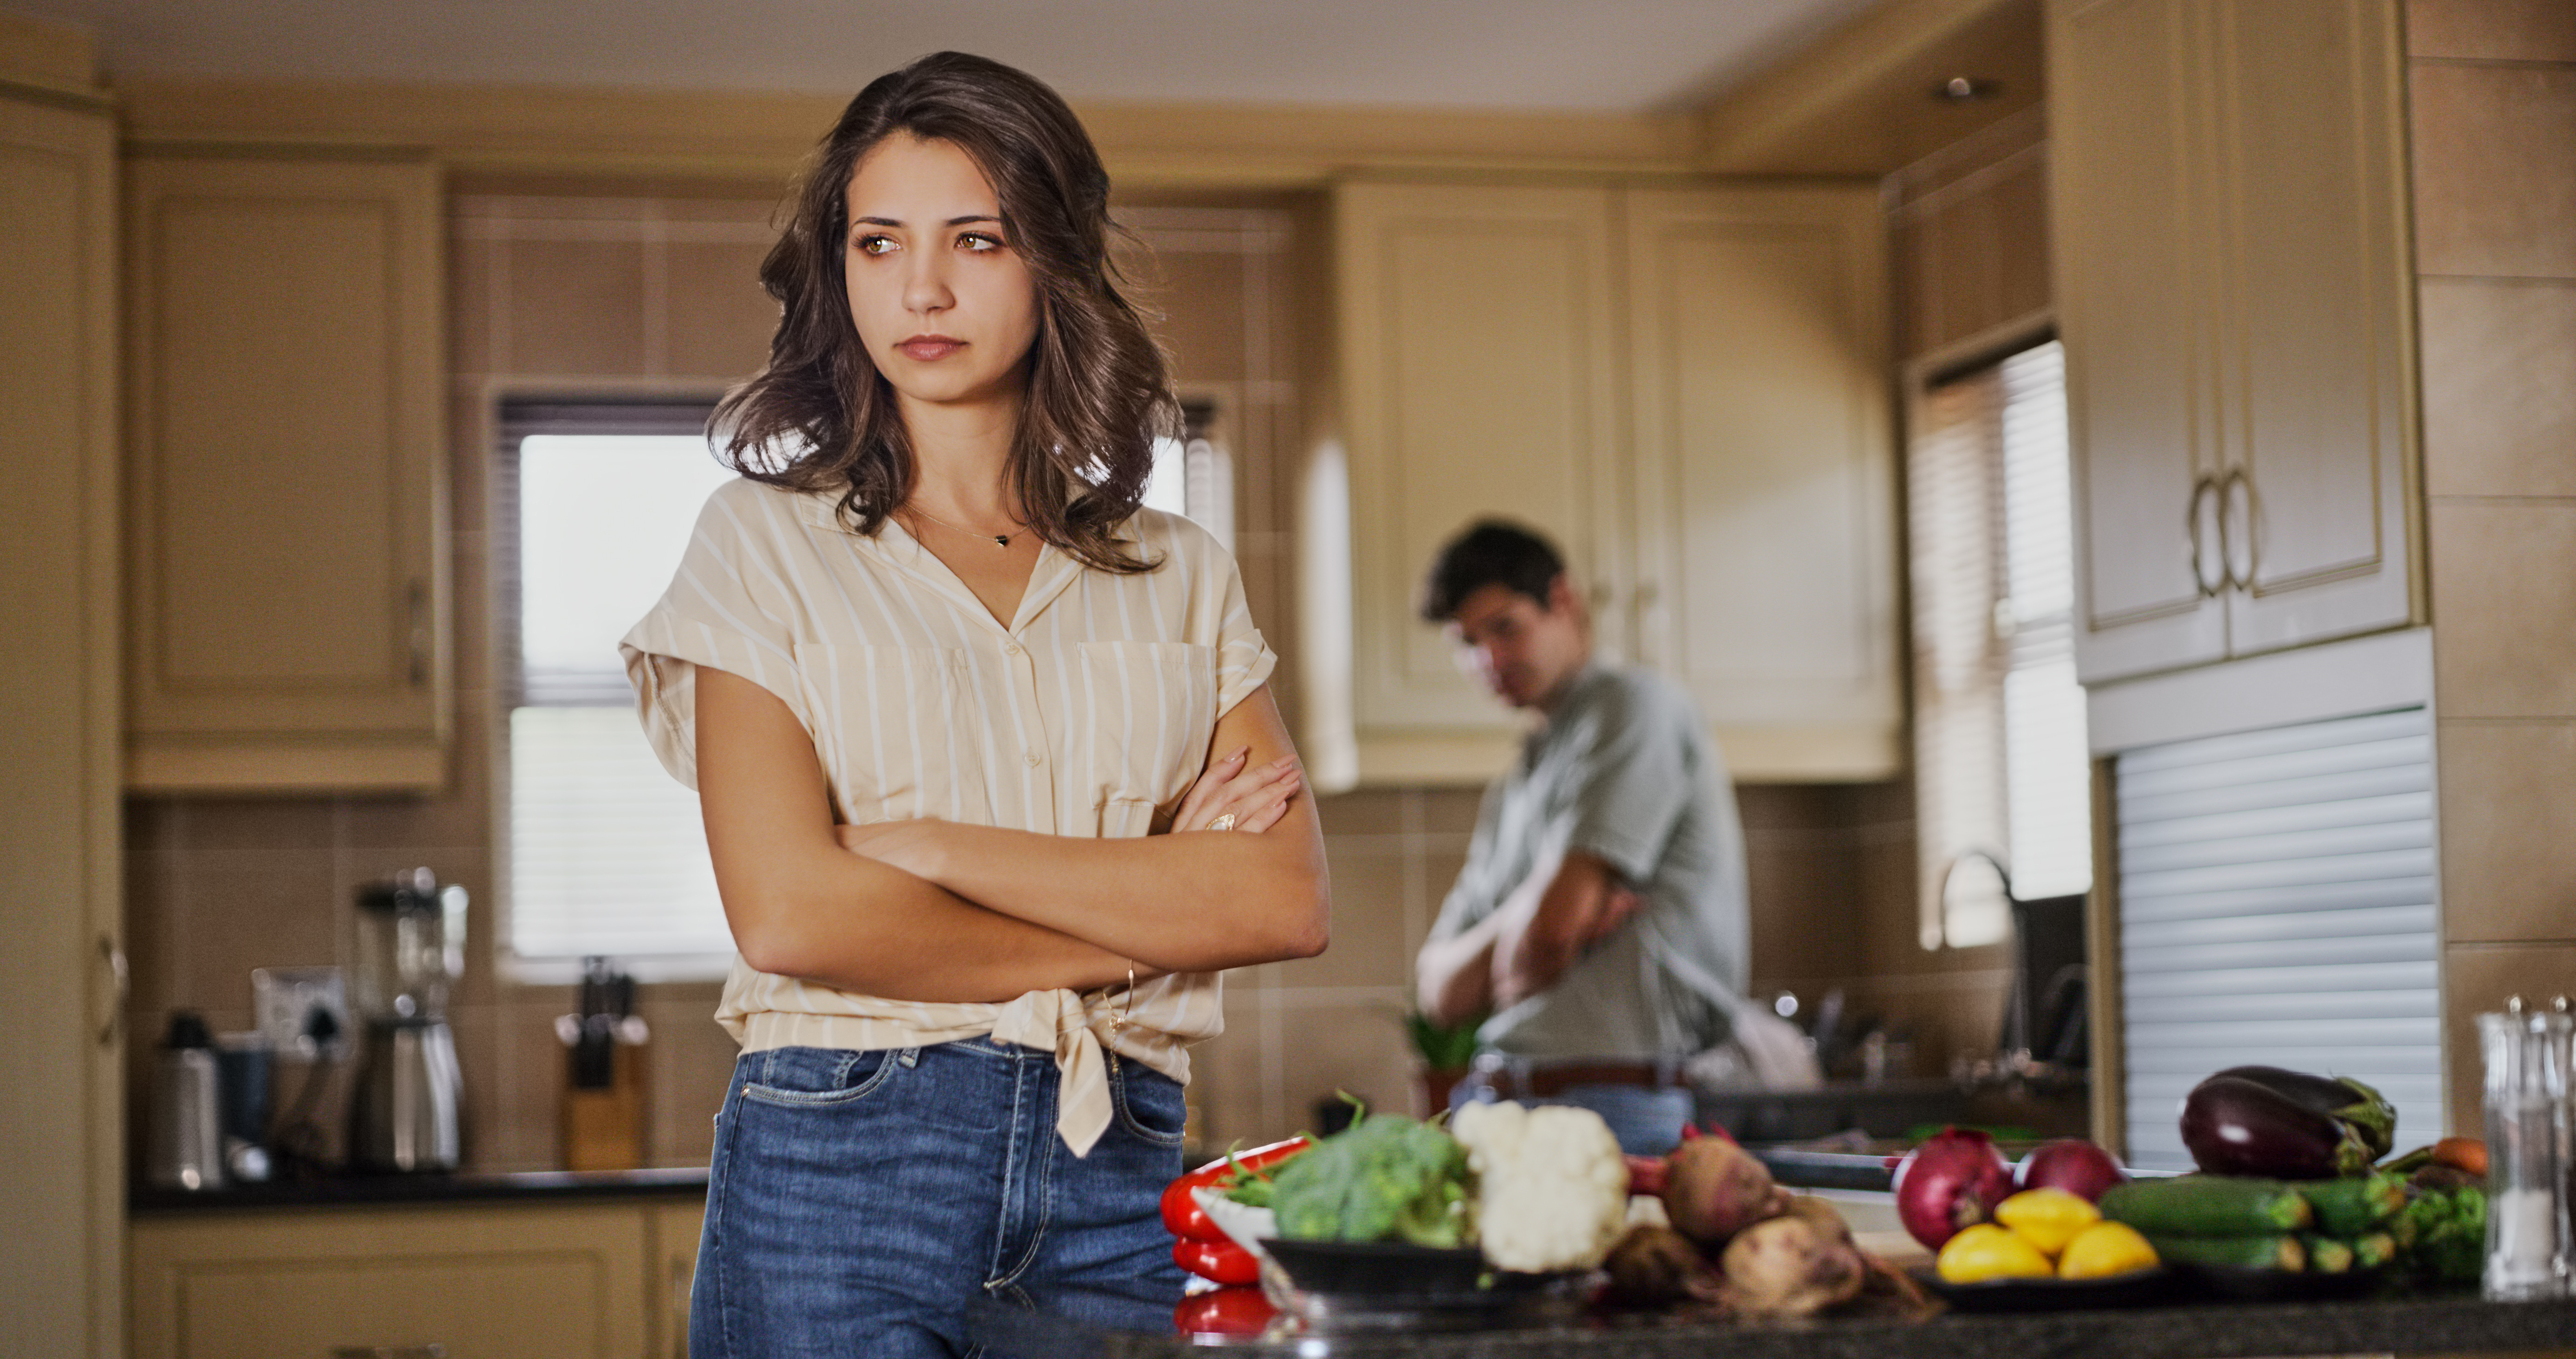 An upset woman standing in the foreground while a man stands in the background | Source: Getty Images